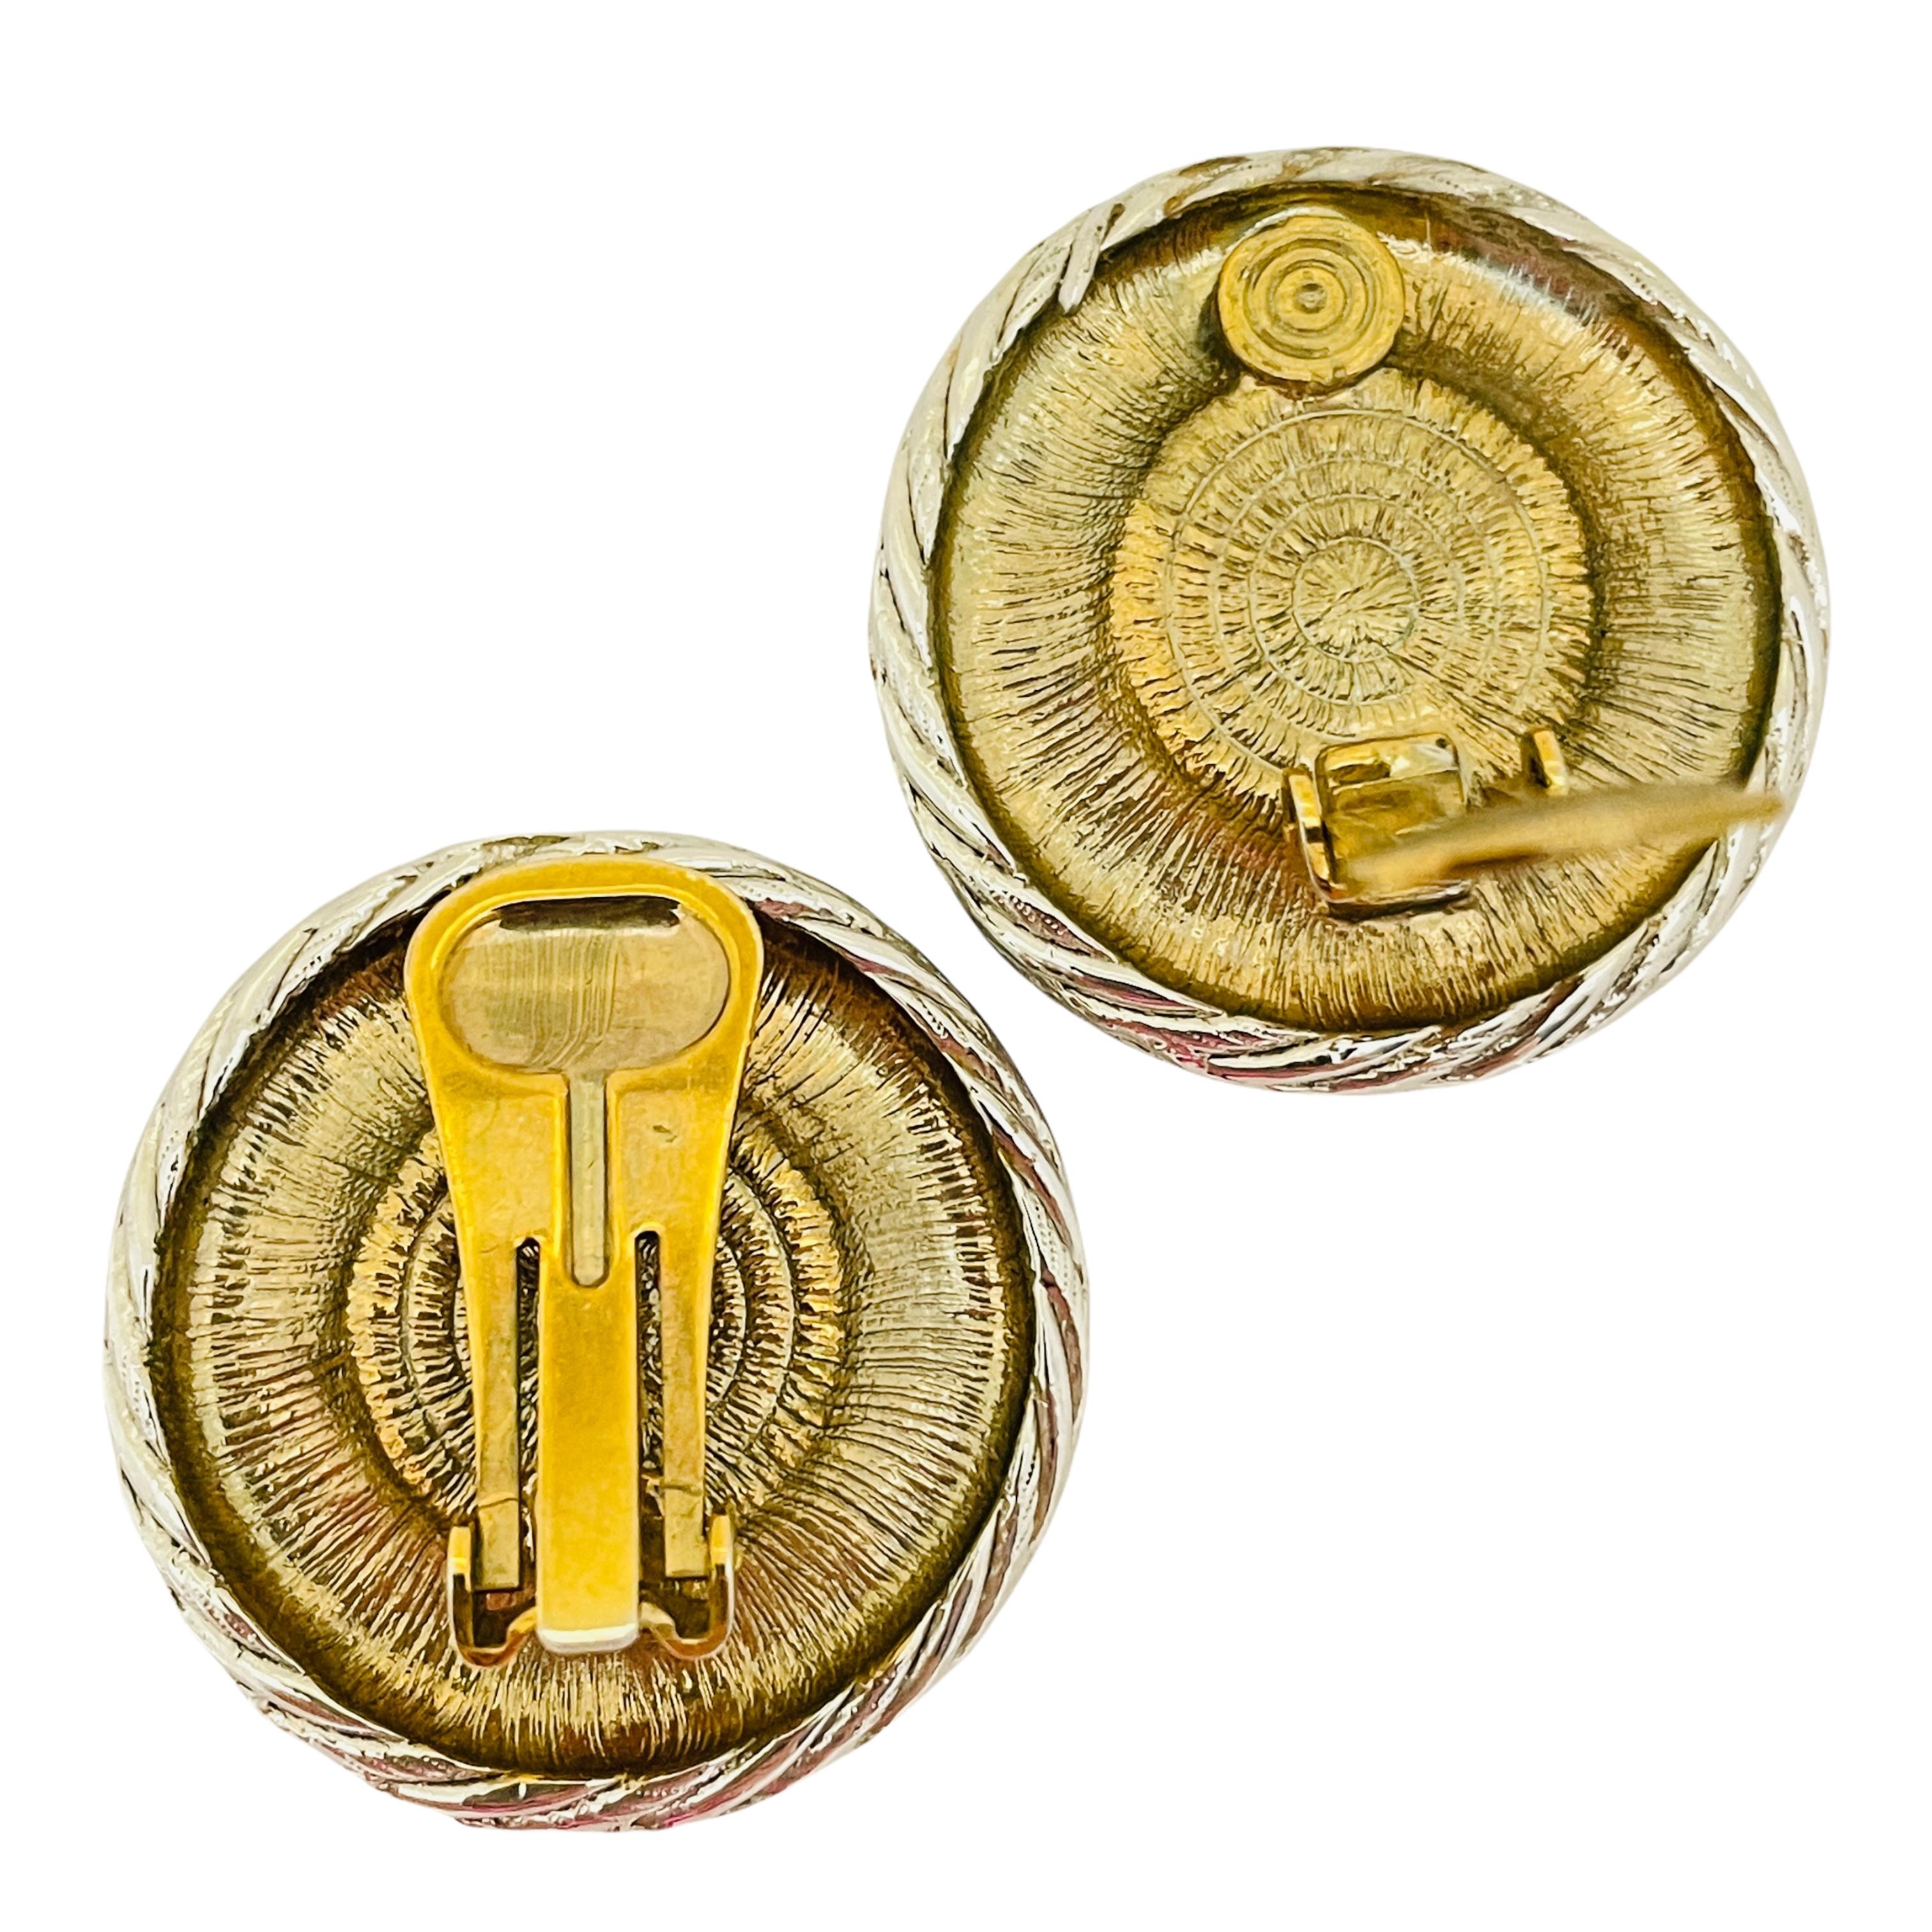 Vintage gold silver nautical coin designer runway clip on earrings In Good Condition For Sale In Palos Hills, IL